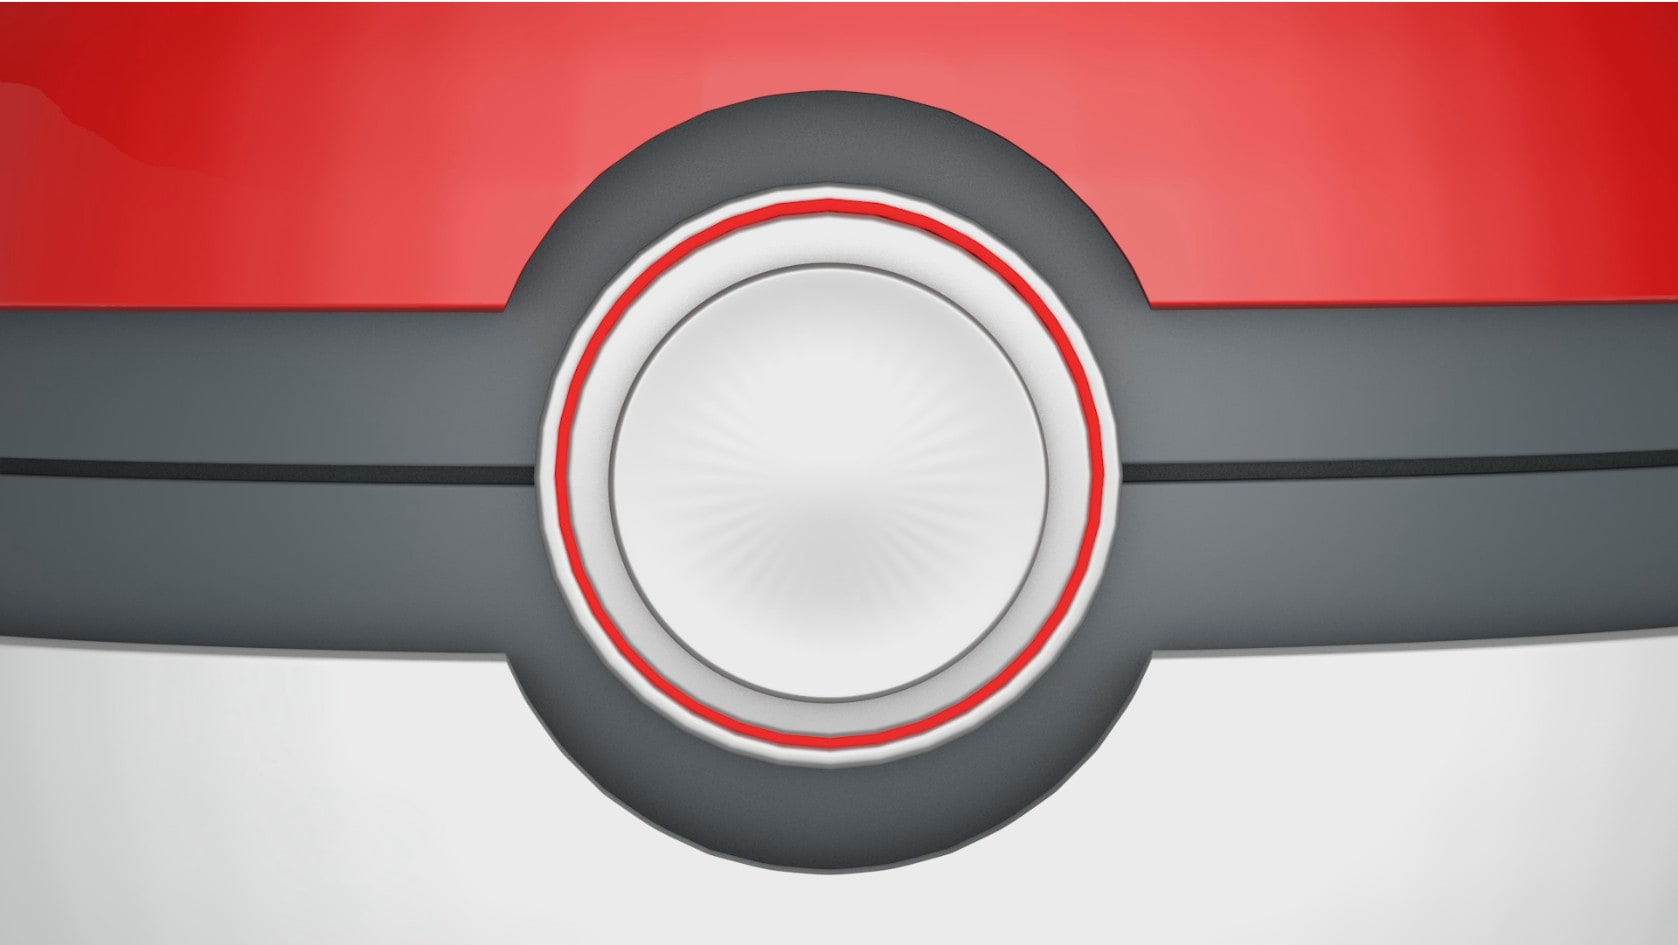 Pokéball Stinger Transition Animated Twitch Scene (Instant Download) 